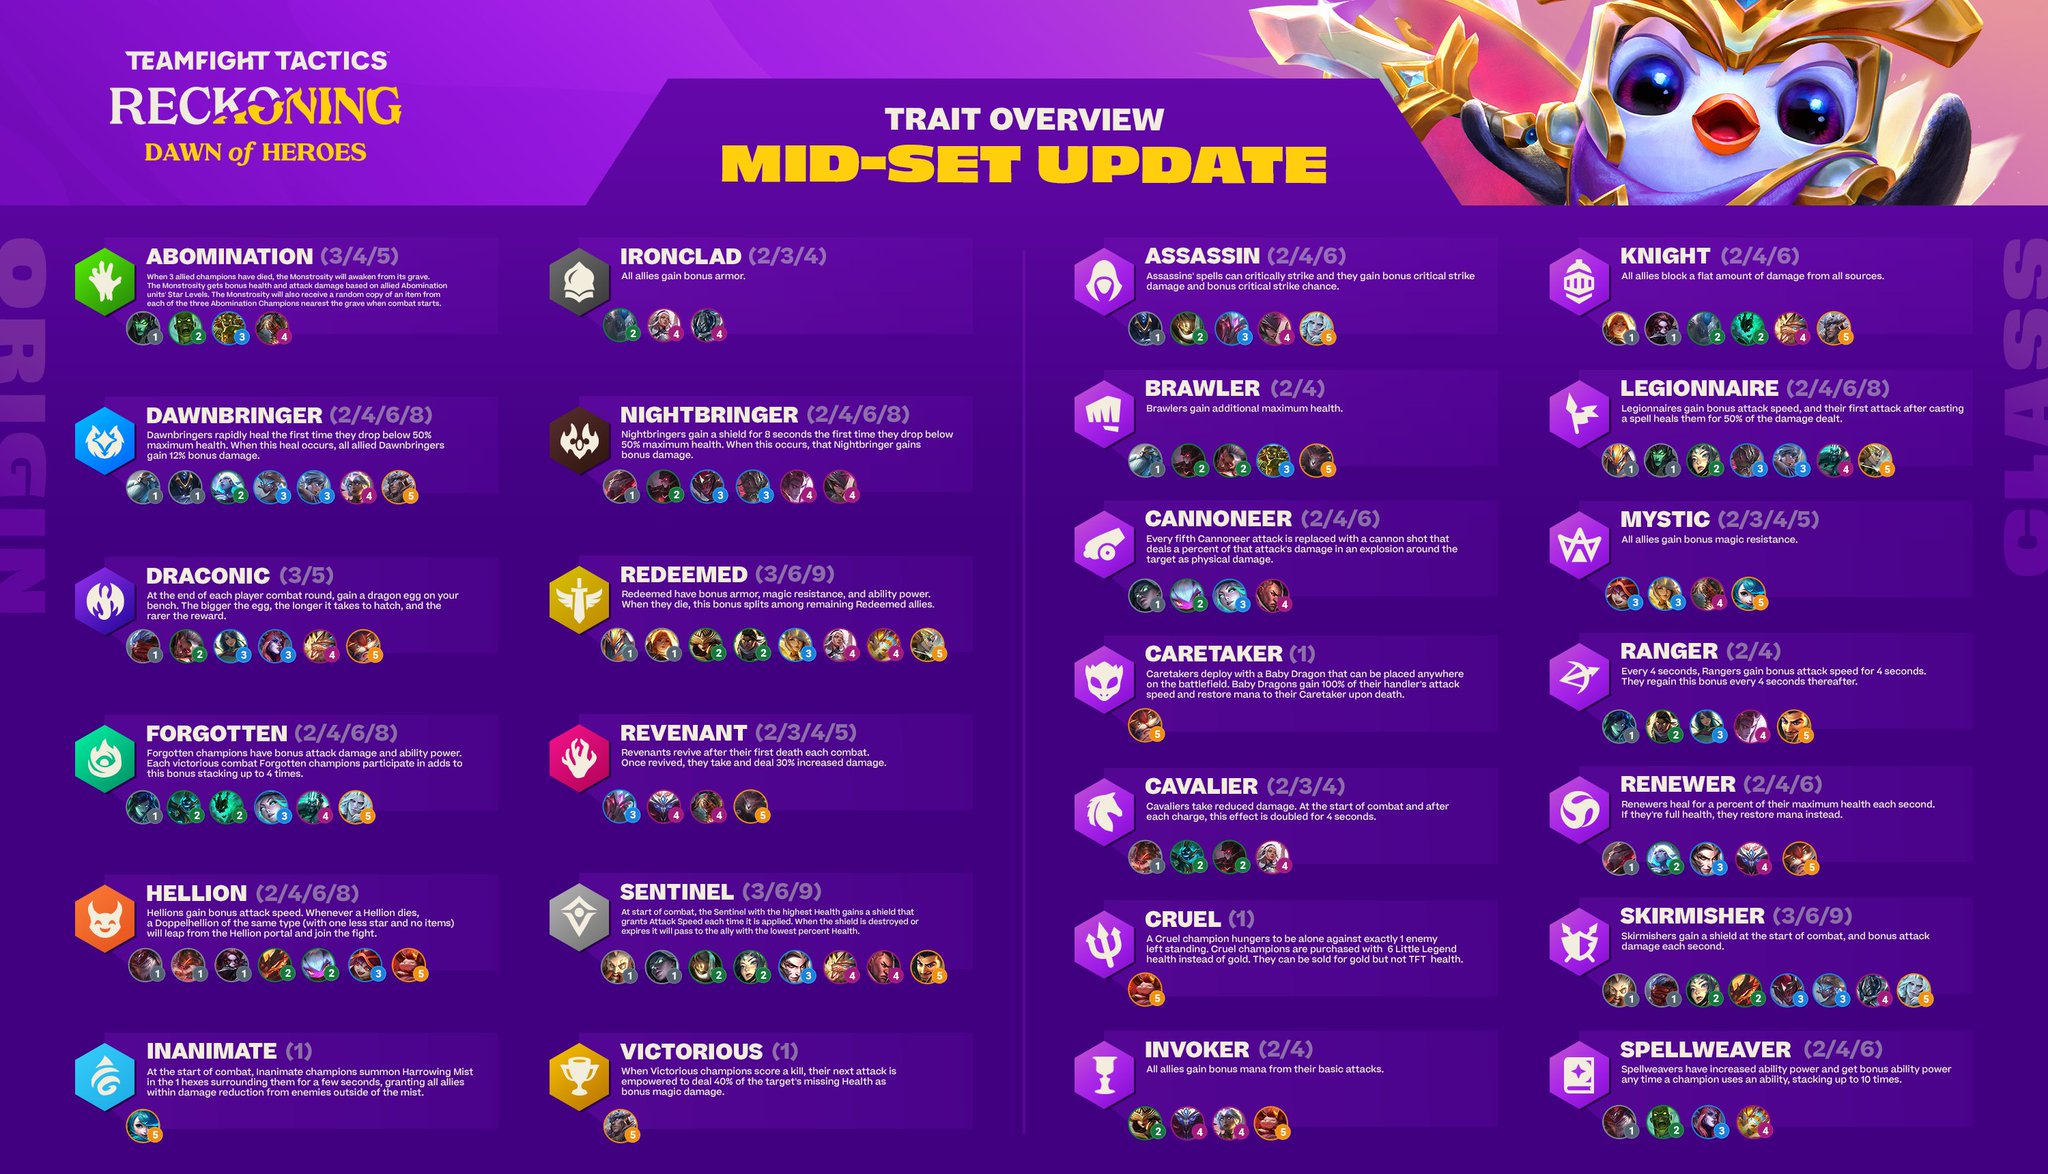 Teamfight on Twitter: "Here's the new Cheat to help you master the and updated traits on your adventure! ⚔️ Find the Reckoning mid-set Cheat Sheet here: https://t.co/nOk46Lgoia https://t.co/SozpKFzGV1" /